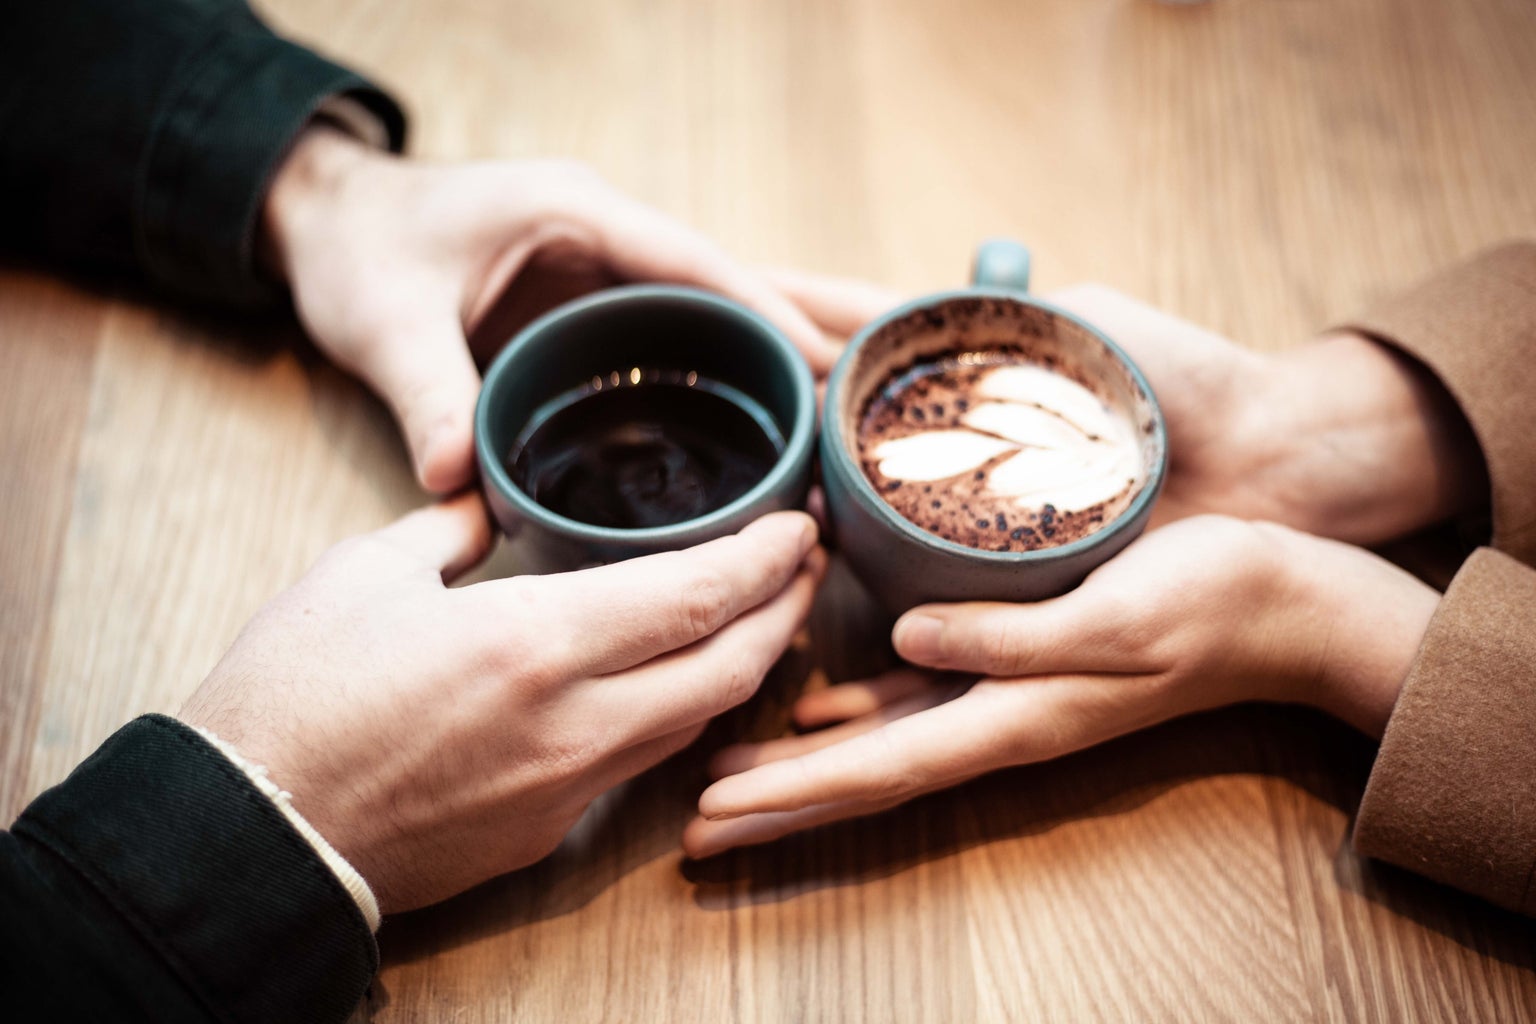 two cups of hot chocolate on table being held